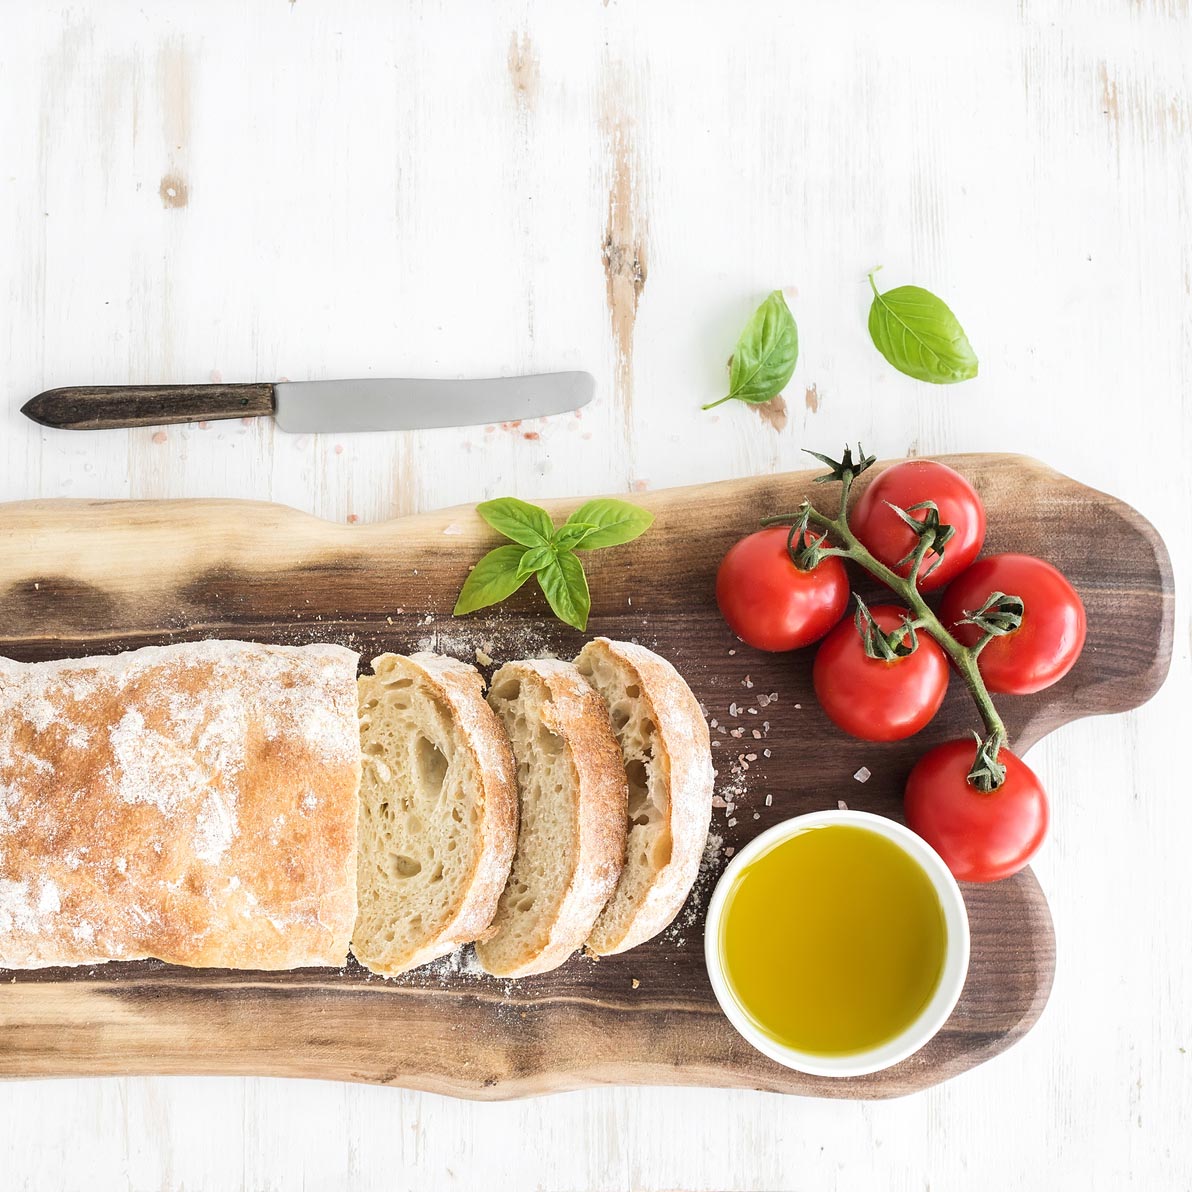 Freshly baked ciabatta bread with cherry-tomatoes, olive oil, basil and salt on walnut wood board over white background, top view, copy space